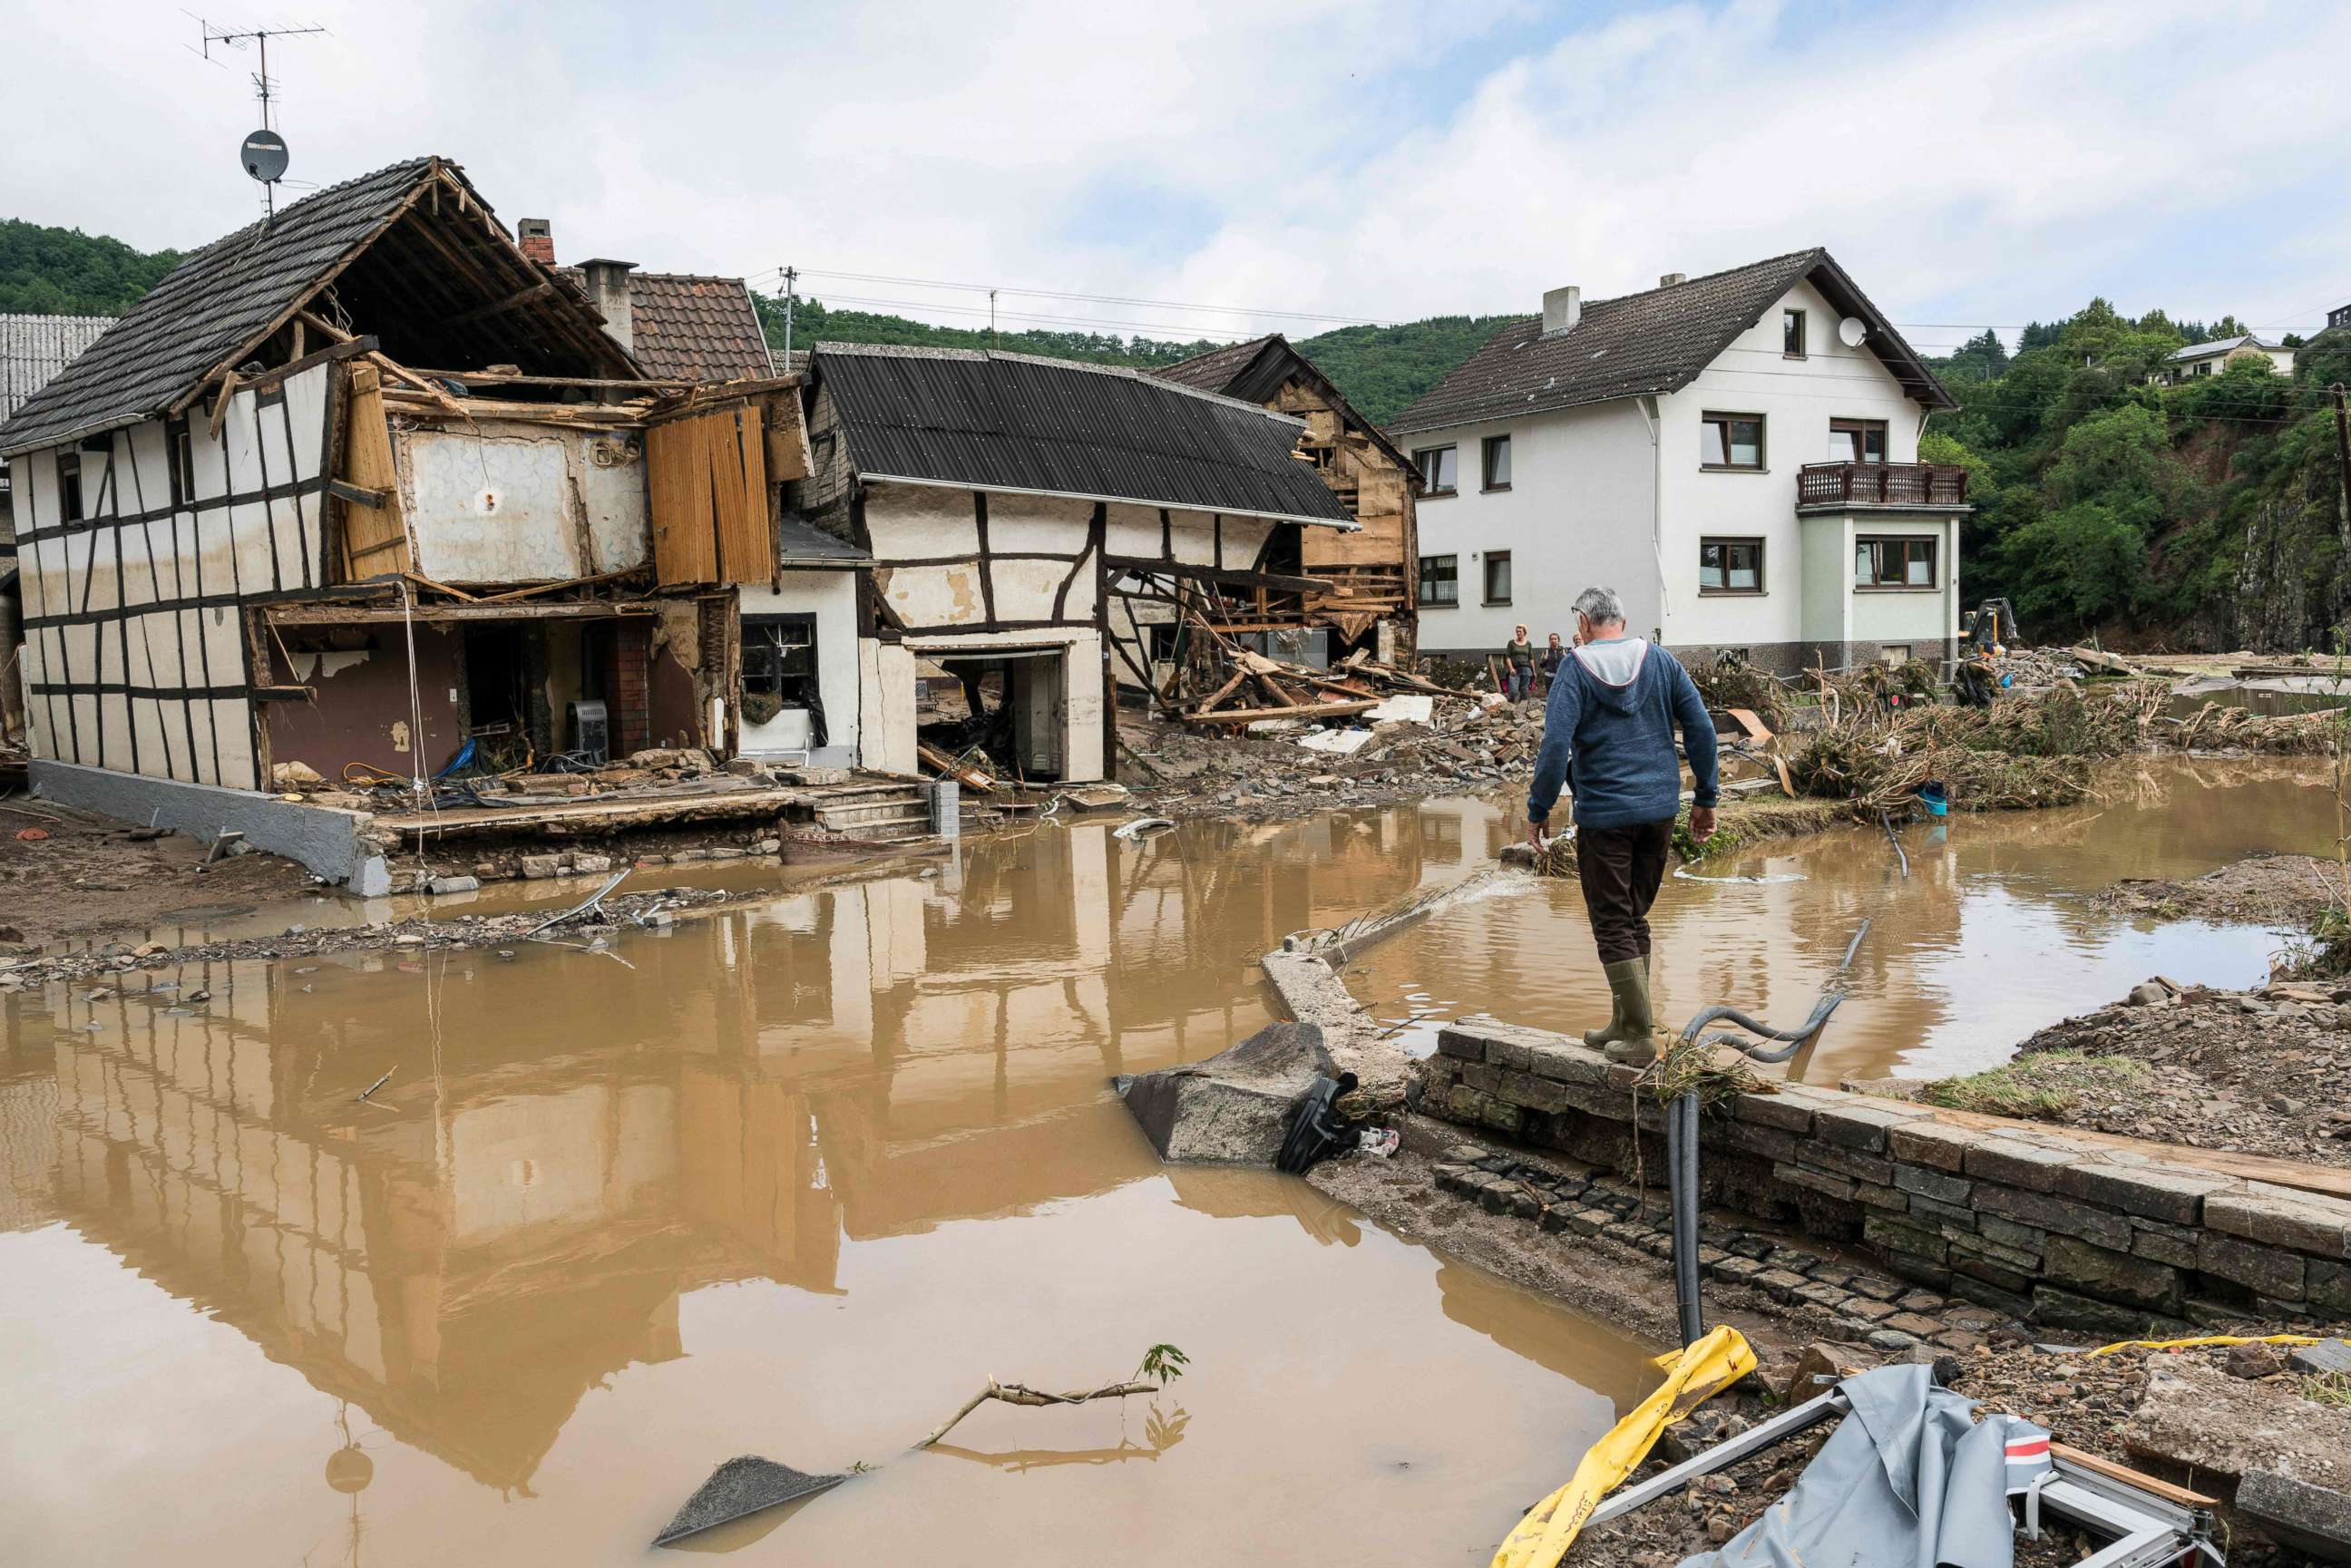 PHOTO: A man walks through floodwater towards destroyed houses in Schuld near Bad Neuenahr, western Germany, on July 15, 2021.